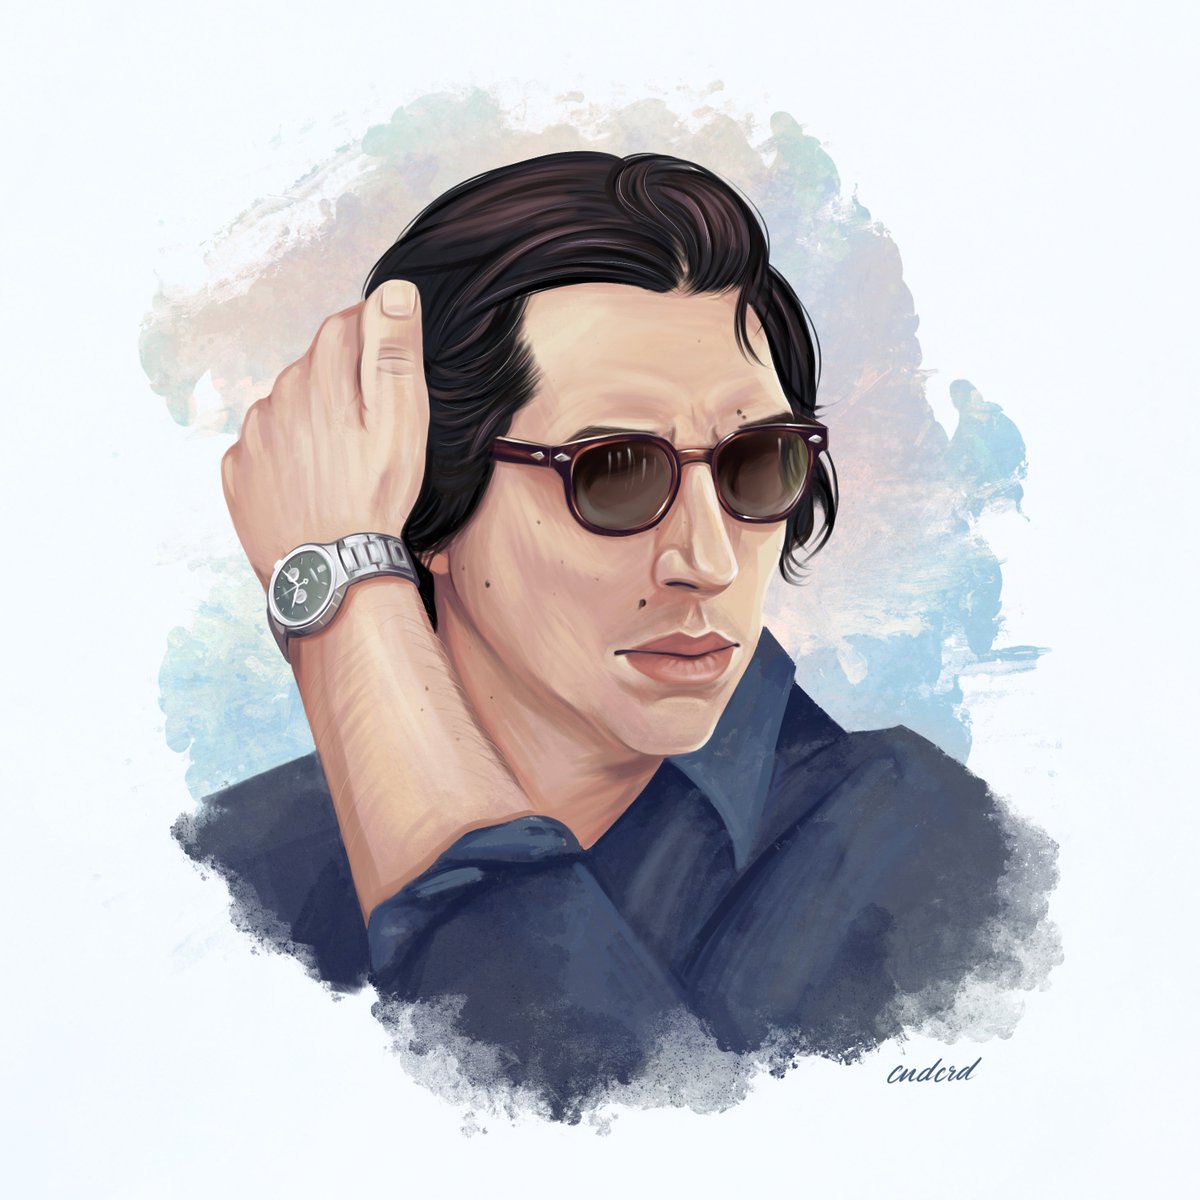 hand in hair + sunglasses, how could I not? #adamdriver